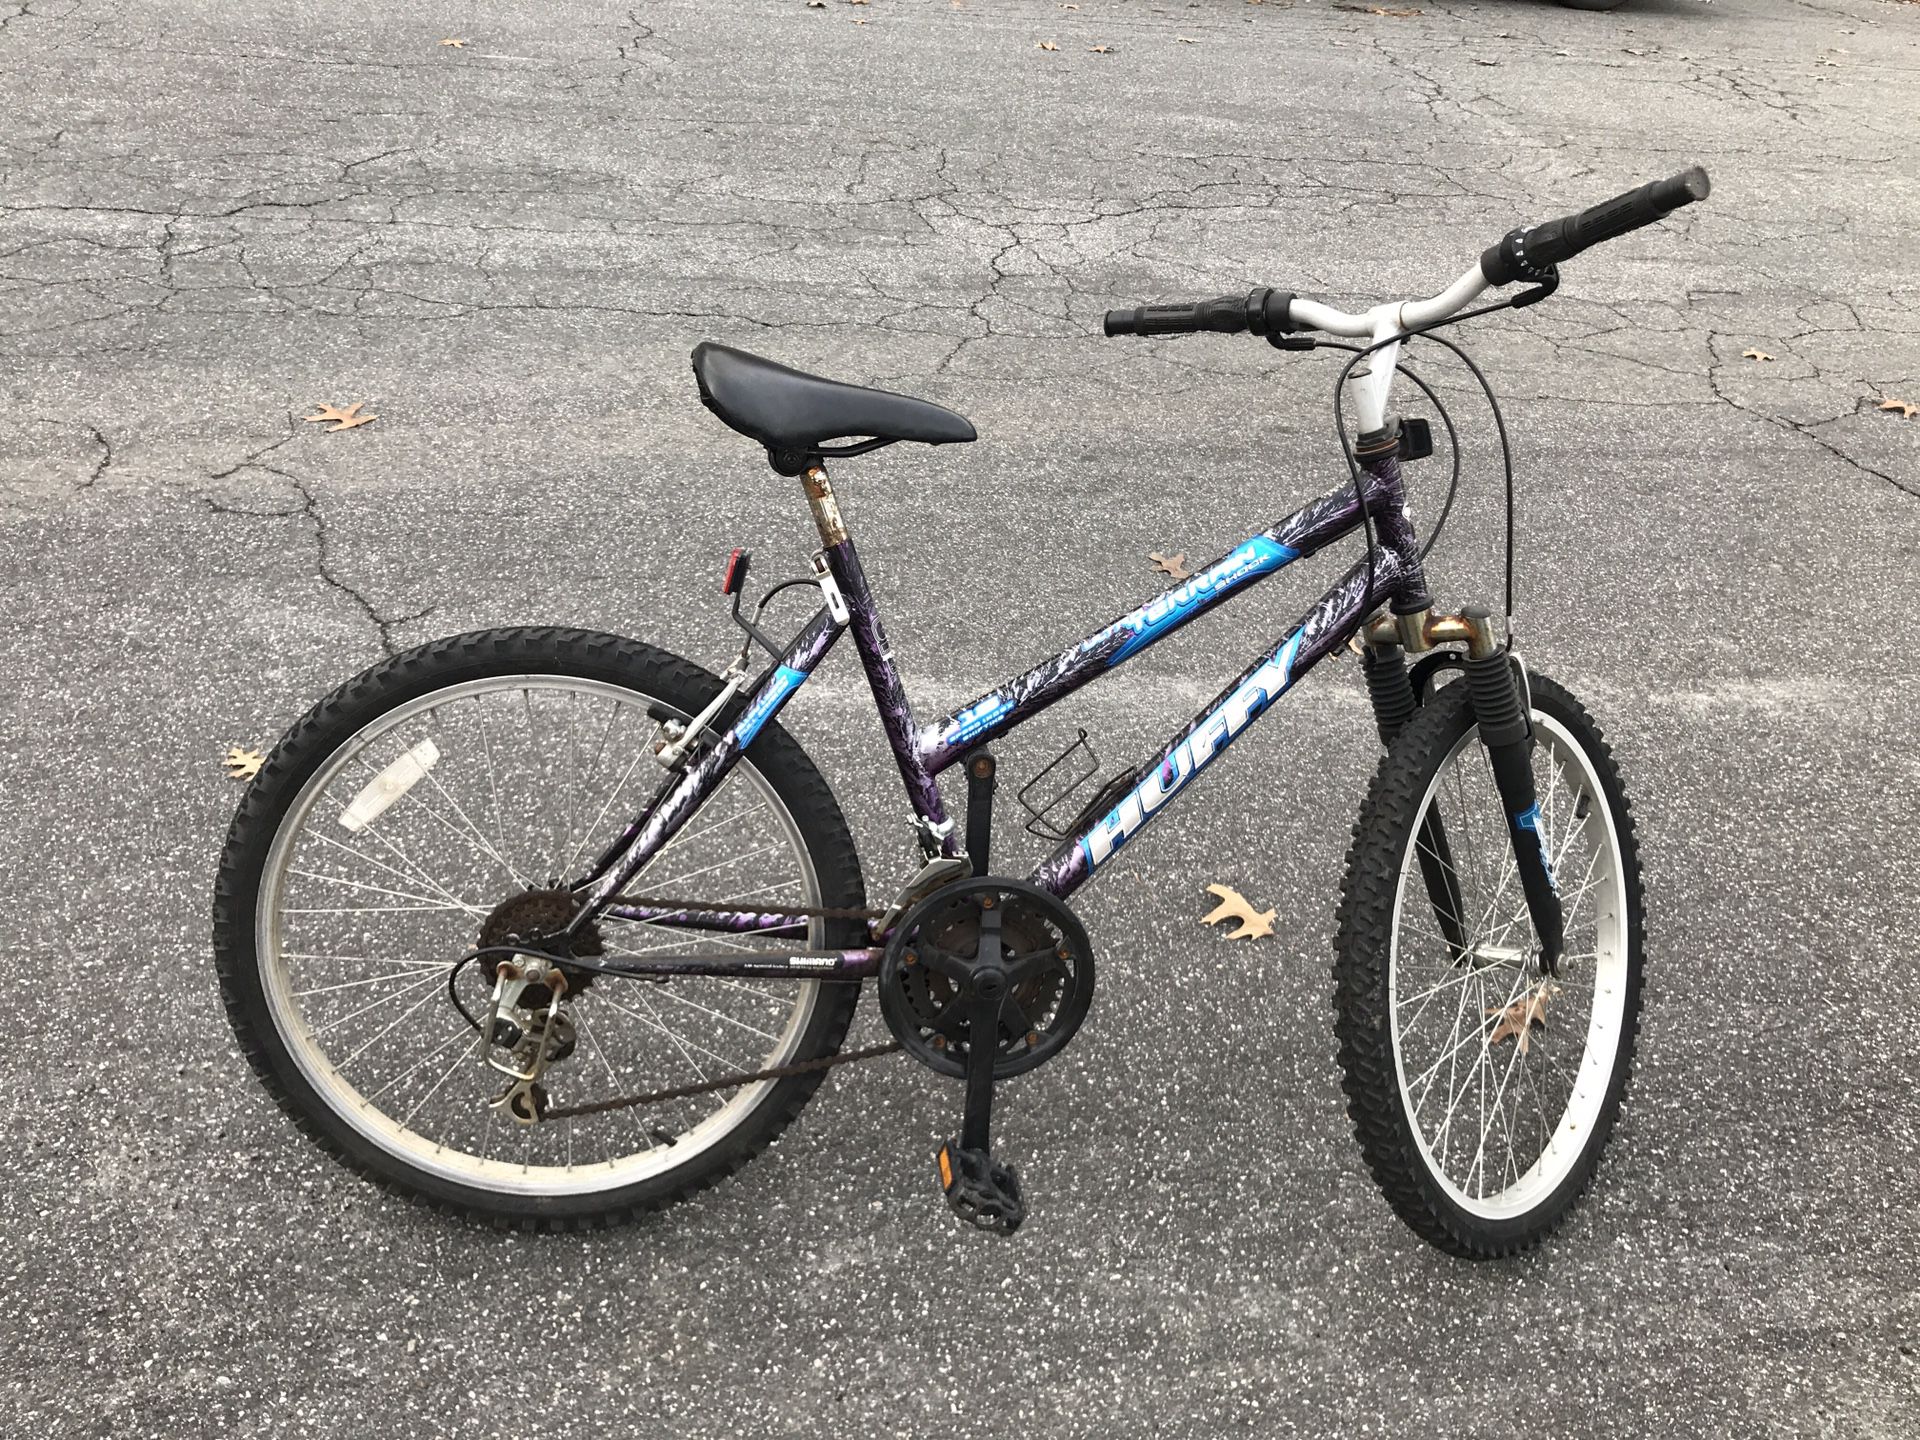 24-inch Huffy mountain bike for sale. Works well. $45, cash only. Can deliver it to you if you're not too far from short pump area and if you are wil